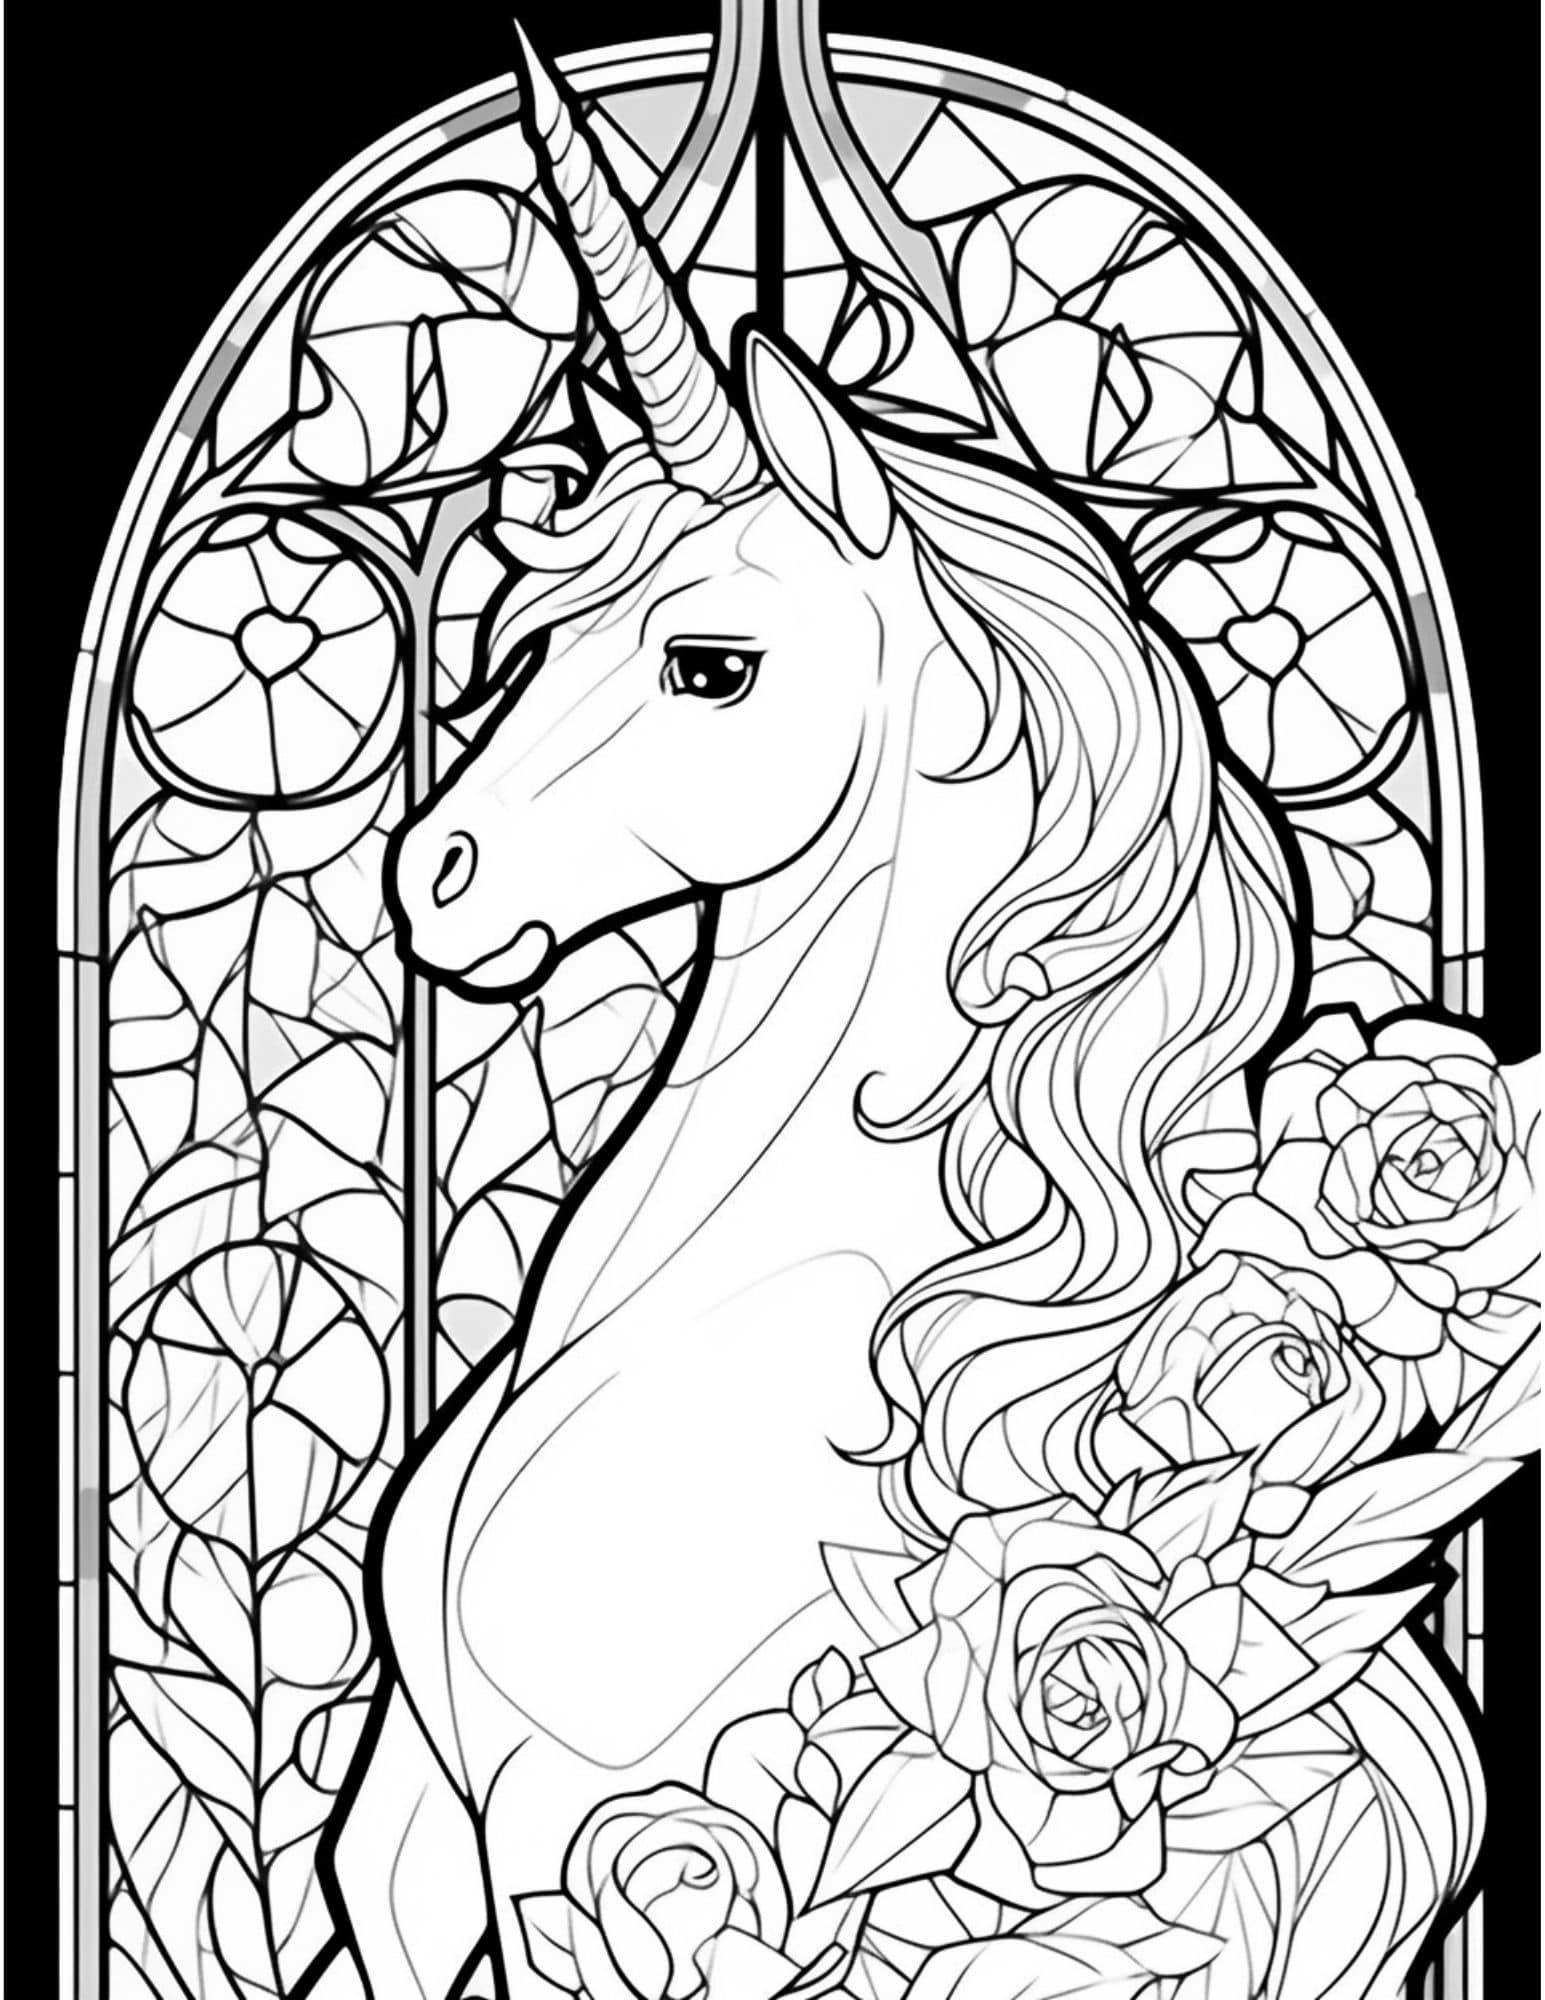 Magical unicorn coloring pages for kids and adults